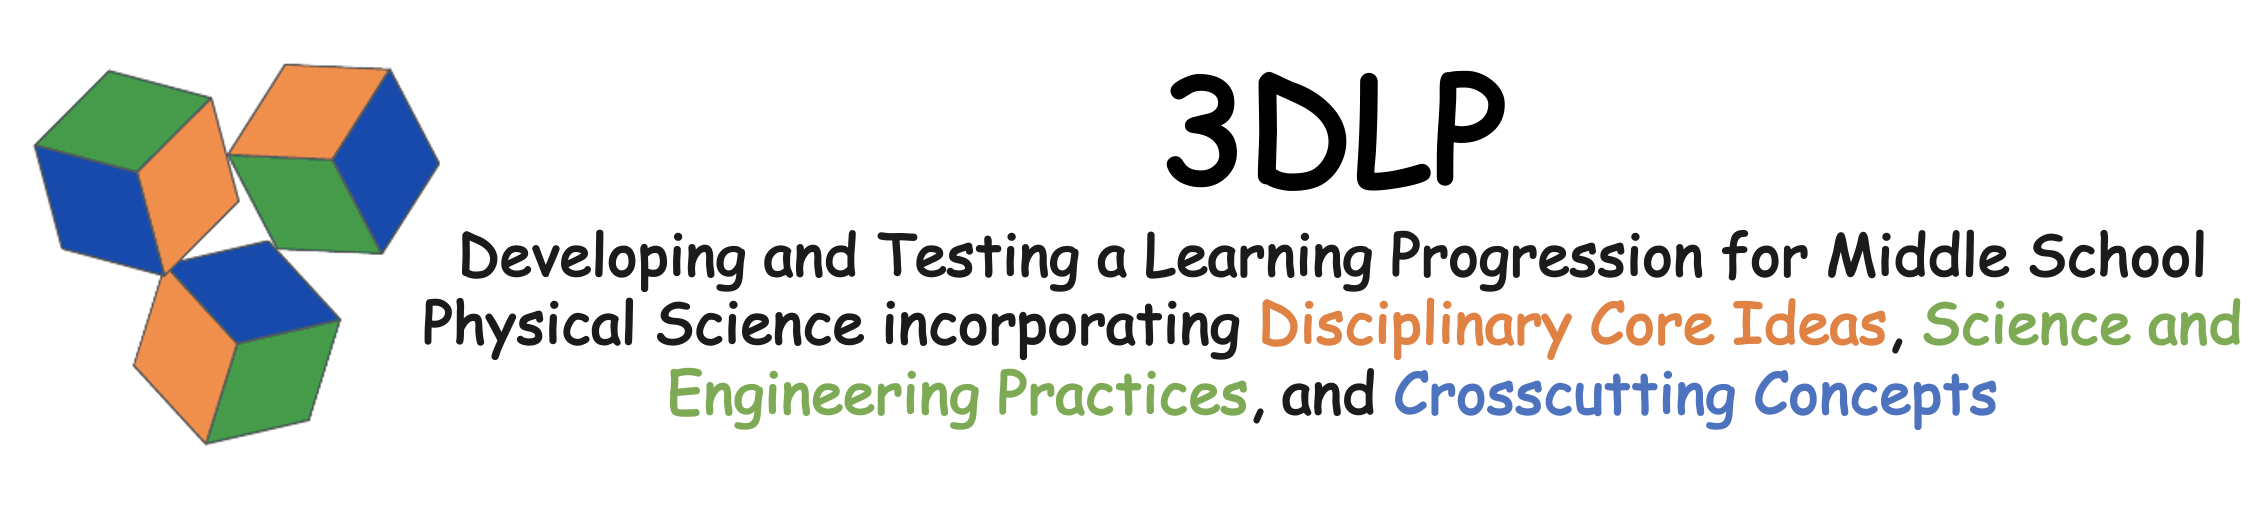 3DLP Developing and Testing a Learning Progression for Middle School Physical Science incorporating Disciplinary Core Ideas, Science and Engineering Practices, and Crosscutting Concepts logo